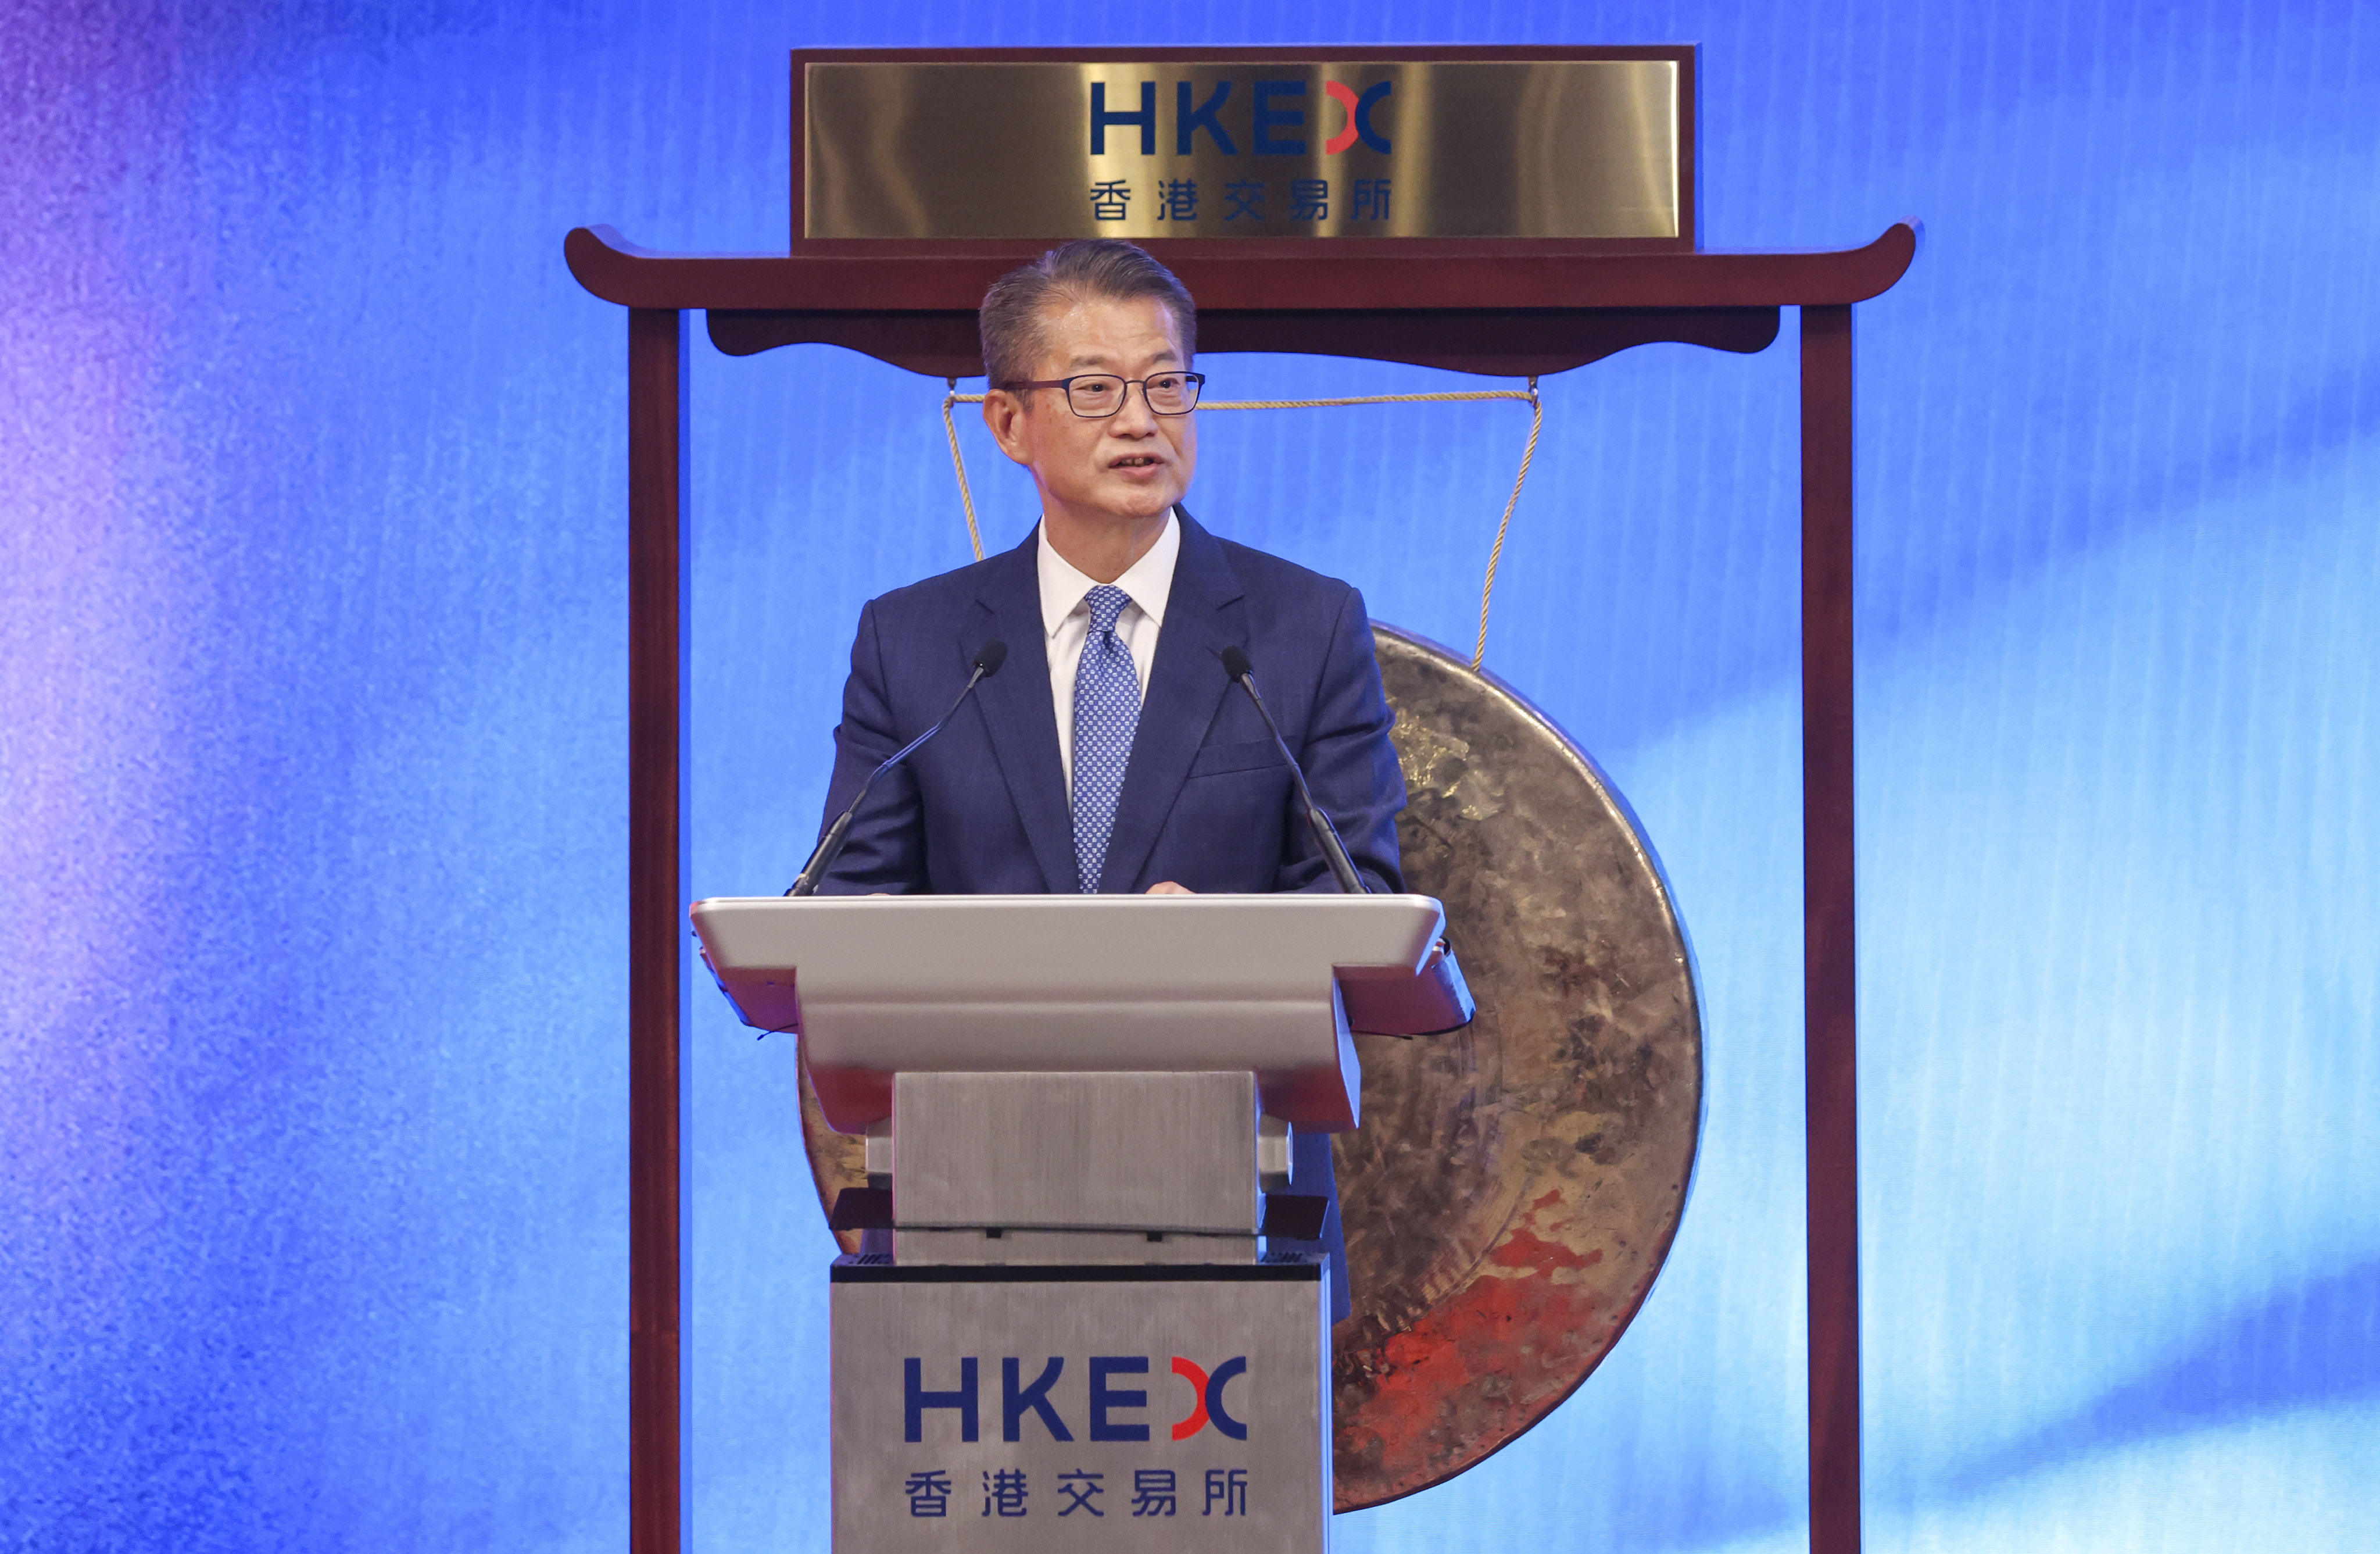 Chan unveiled his vision in a keynote speech at a ceremony on Wednesday that marked the 23rd anniversary of HKEX as a listed company. Photo: May Tse